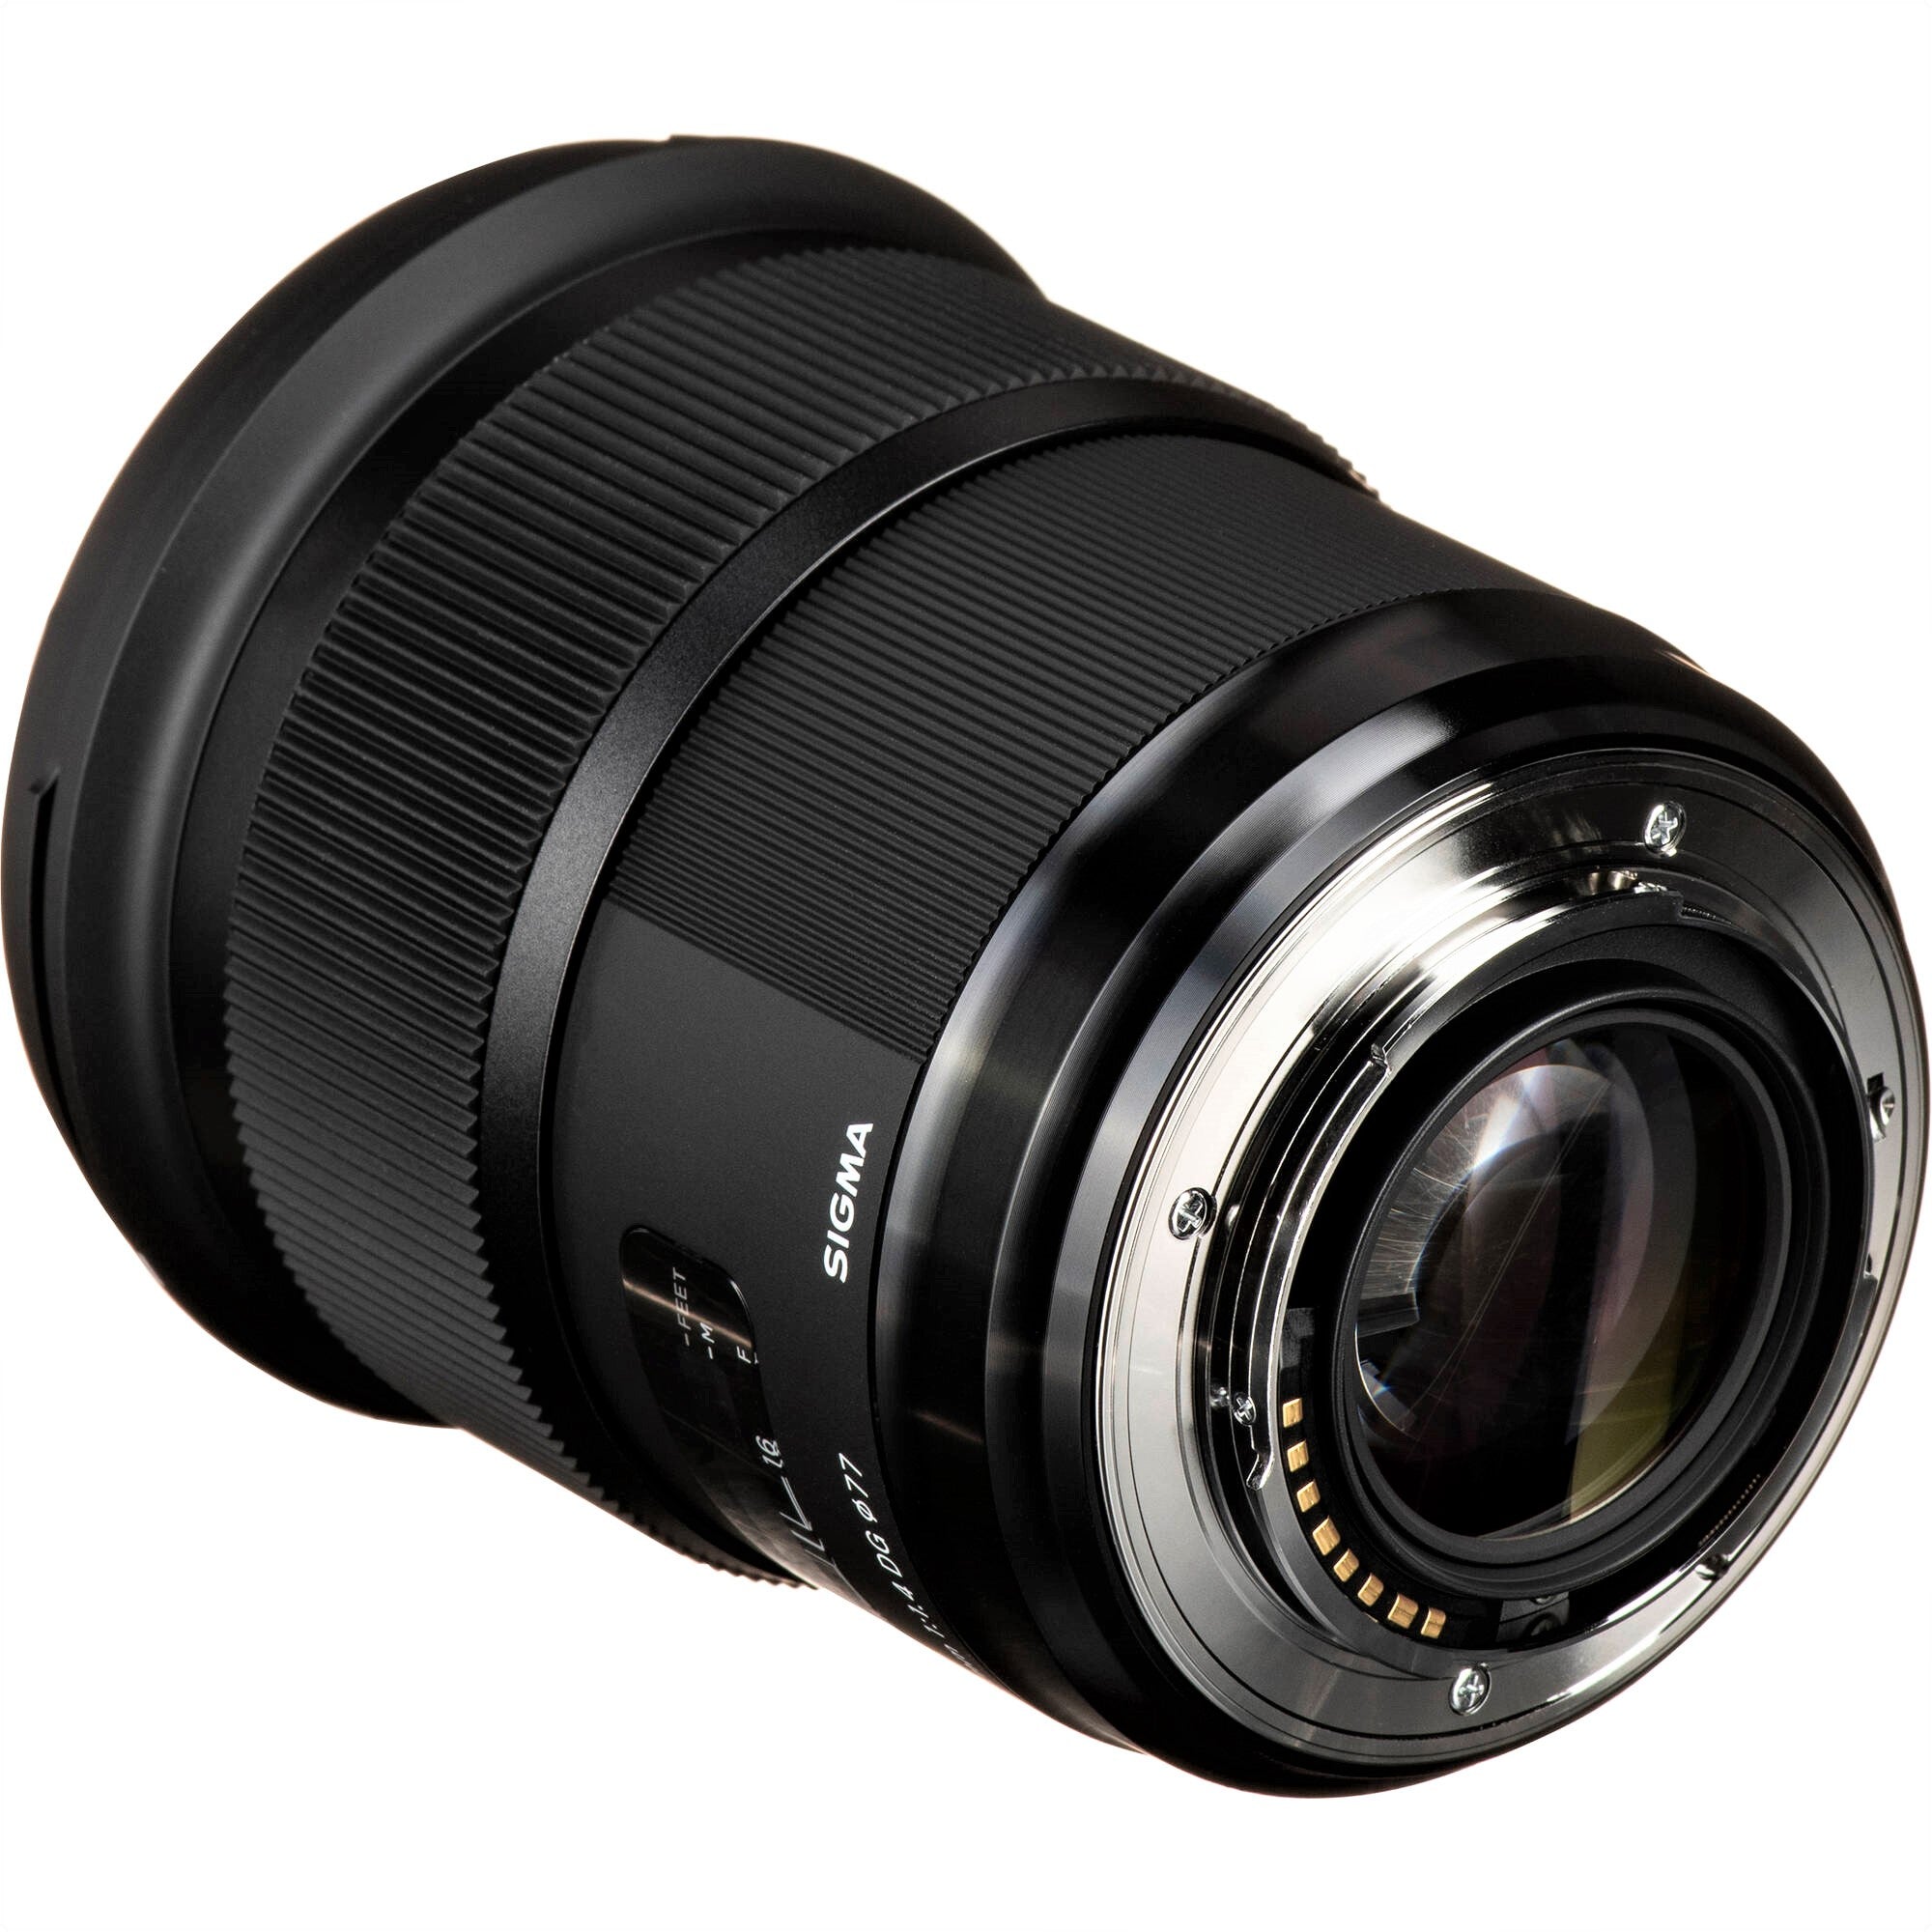 Sigma 50mm F1.4 DG HSM Art Lens for Sony A in a Back-Side View